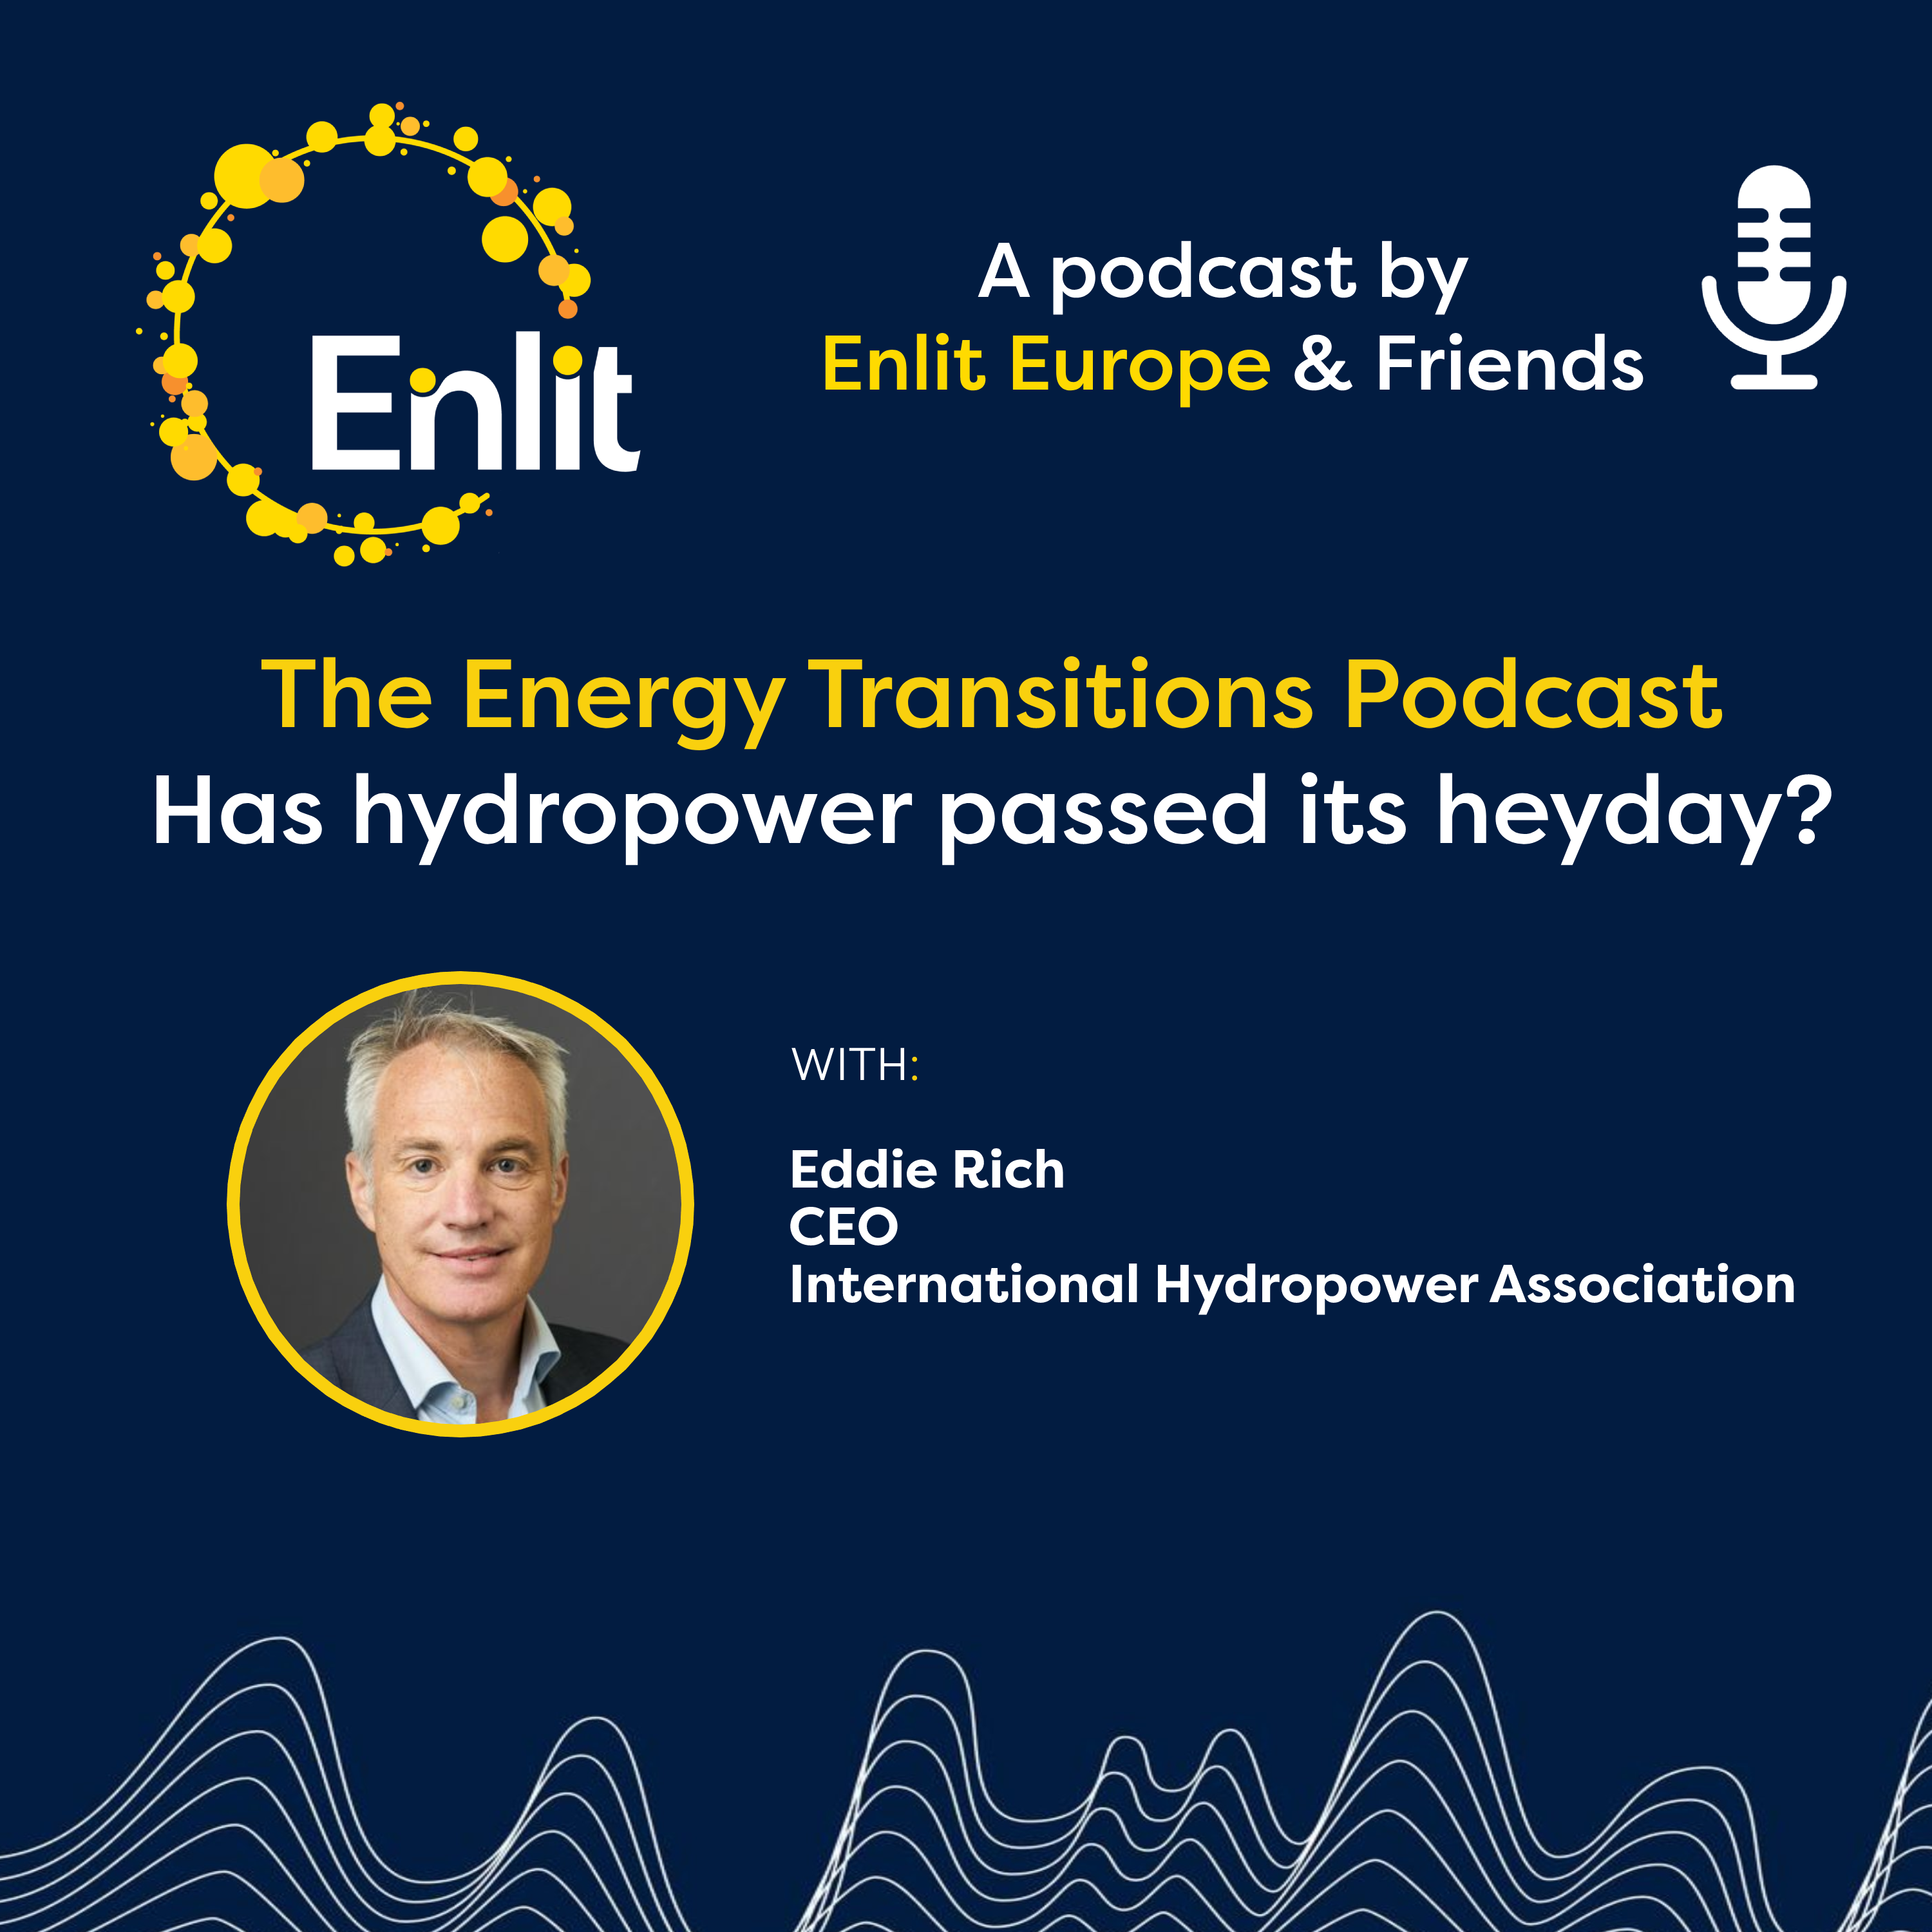 Has hydropower passed its heyday?